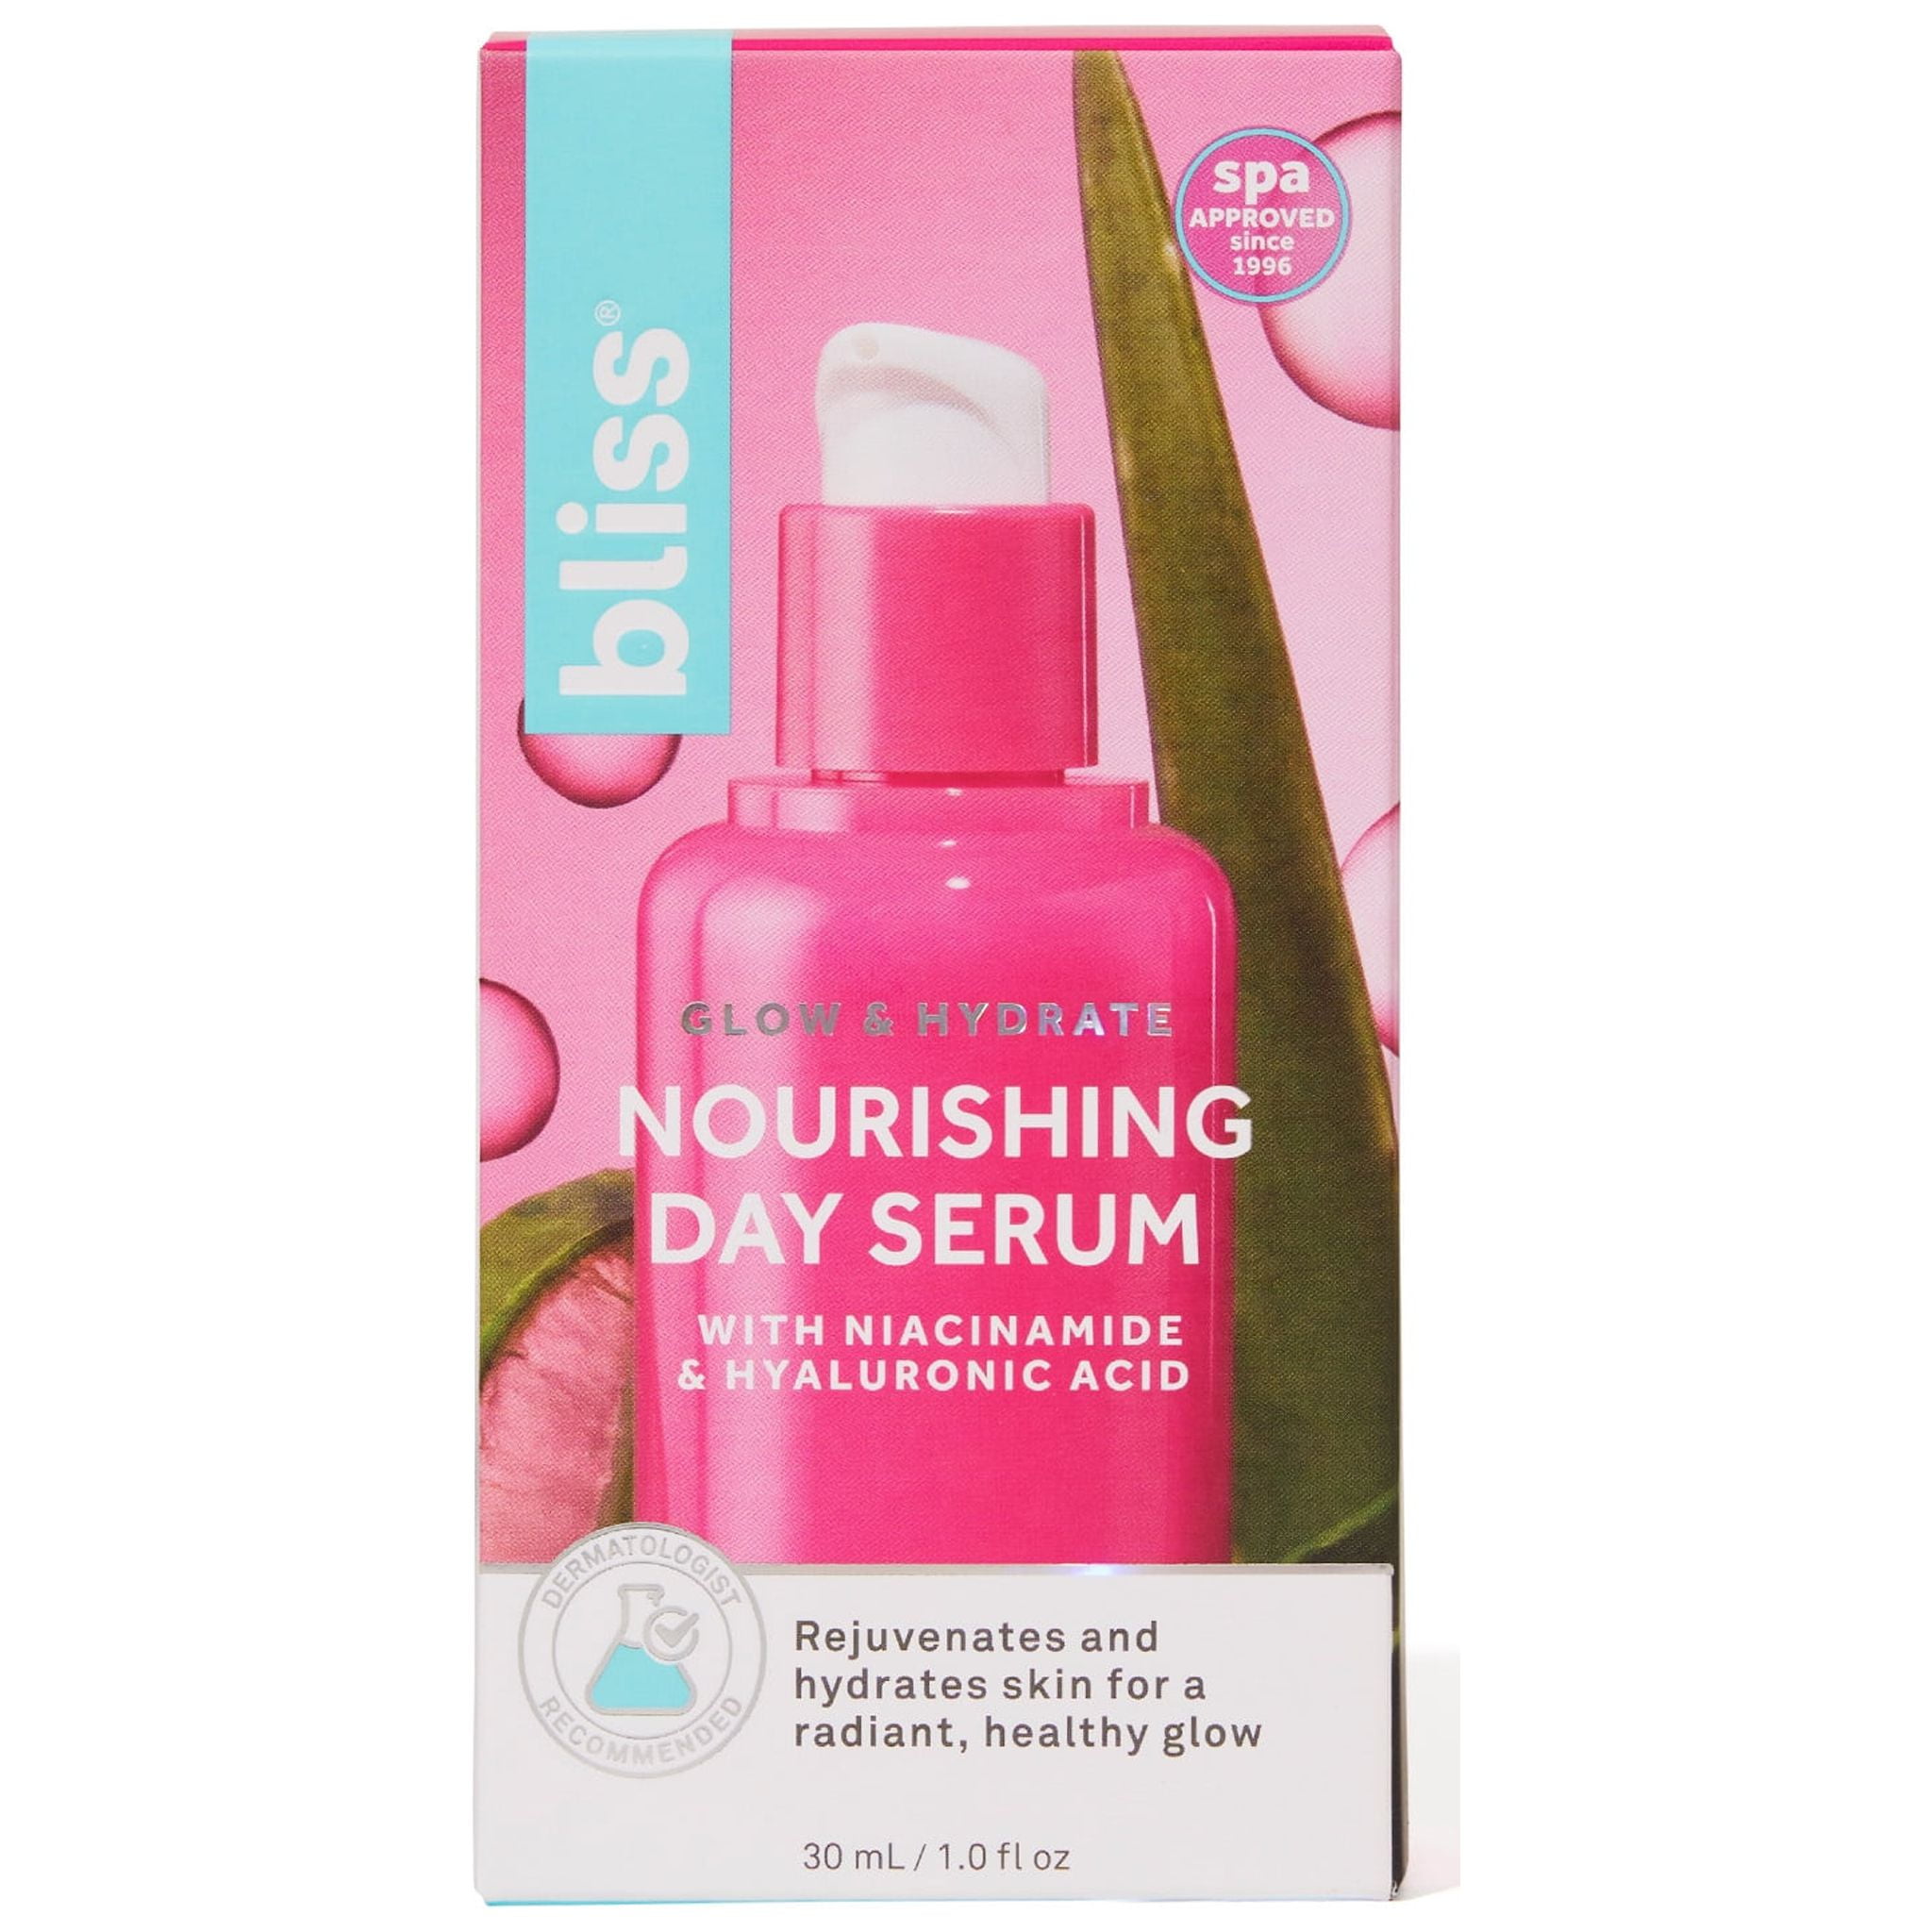 Bliss Glow and Hydrate Niacinamide Hyaluronic Acid Day Serum, 1 oz